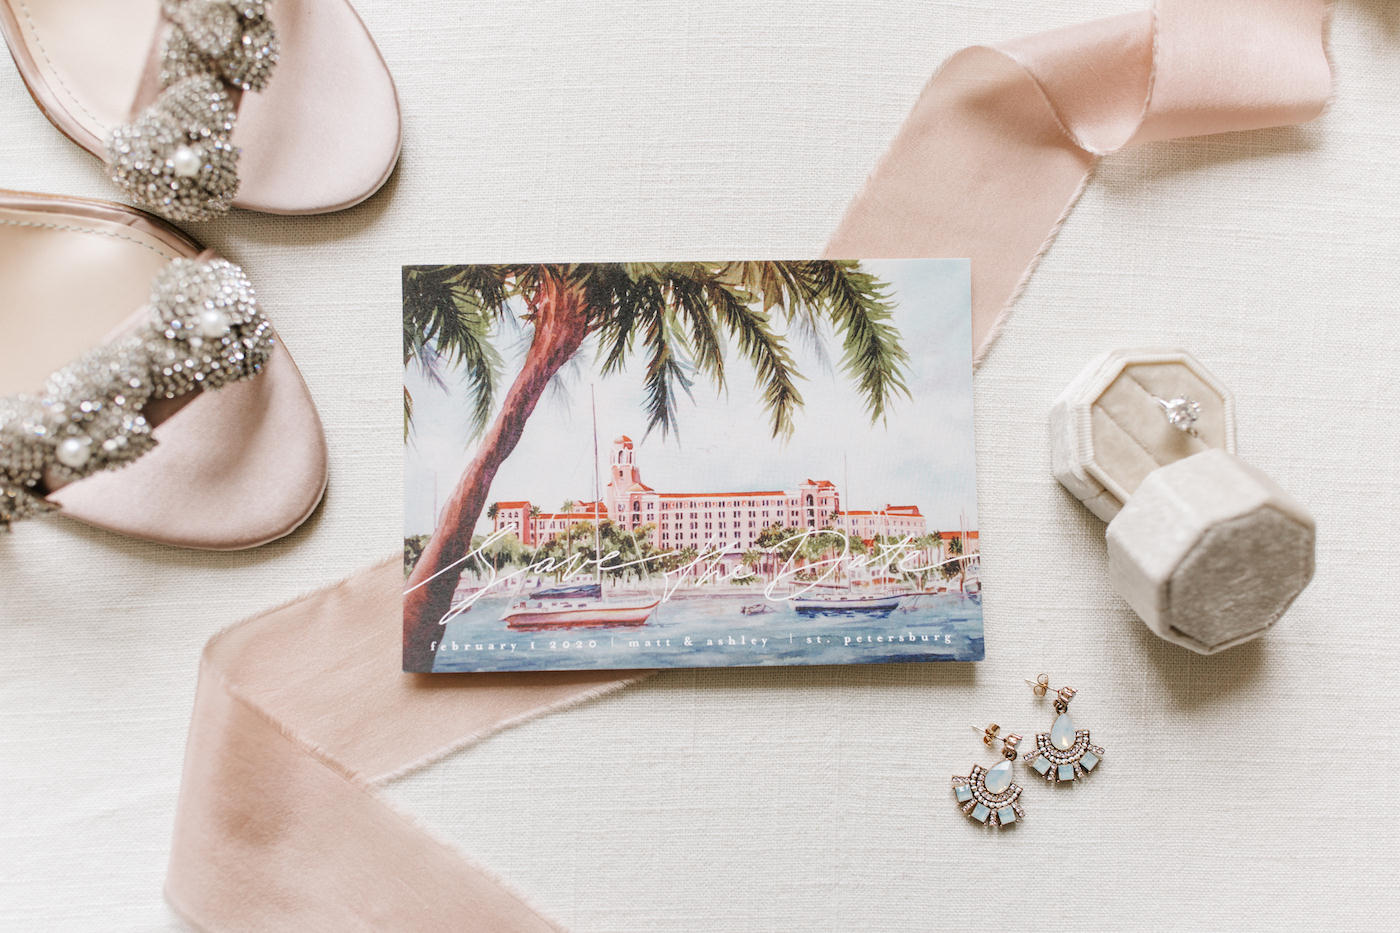 Luxury Florida Save the Date, Watercolor Portrait of Waterfront Vinoy Renaissance Resort in Downtown St. Petersburg, Bridal Wedding Accessores, Diamond Solitaire Engagement Ring in Cream Velvet Ring Box, Teal Boho Chic Earrings, Crystal Floral Strappy Sandal Wedding Shoes | Tampa Bay Wedding Planner Parties A’ La Carte